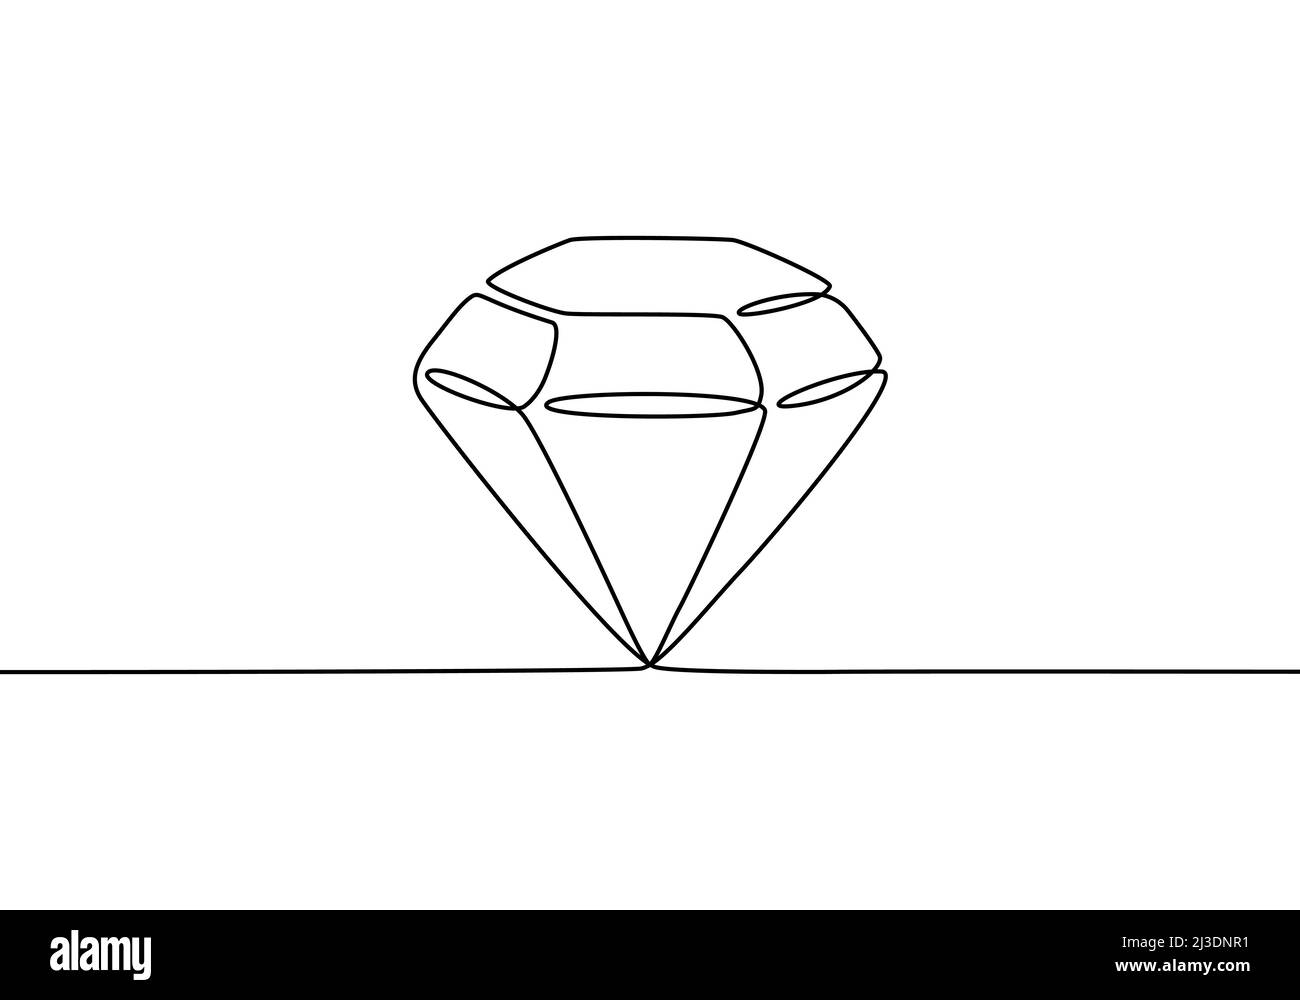 Diamond one line drawing. Gem symbol continuous line illustration isolated on white background. Stock Vector